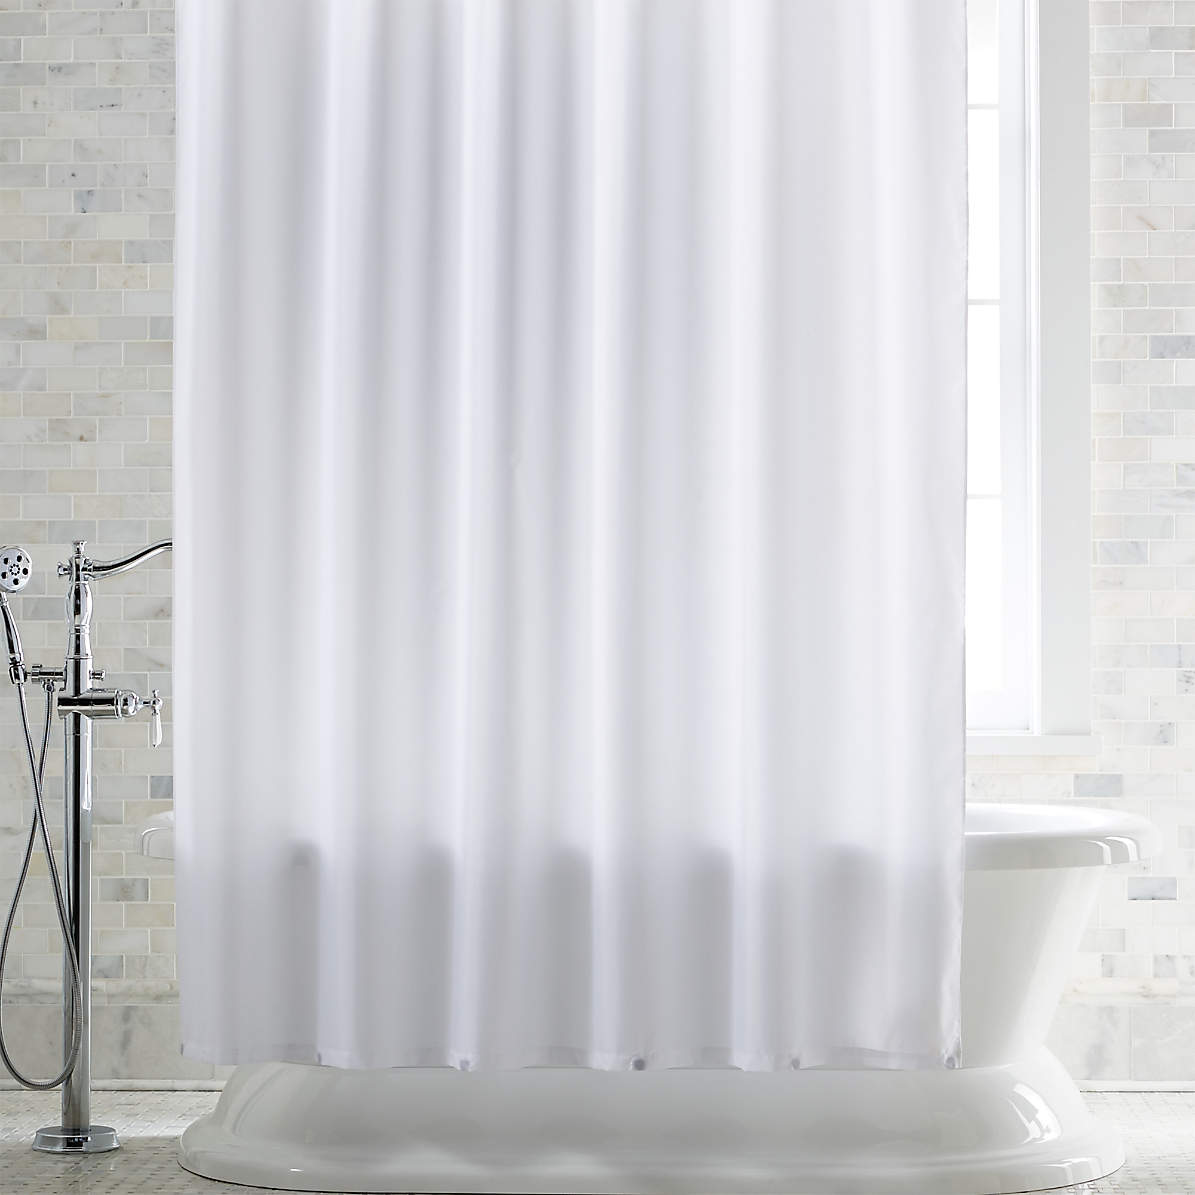 White Shower Curtain Liner With Magnets, Best Fabric Shower Curtain Liner